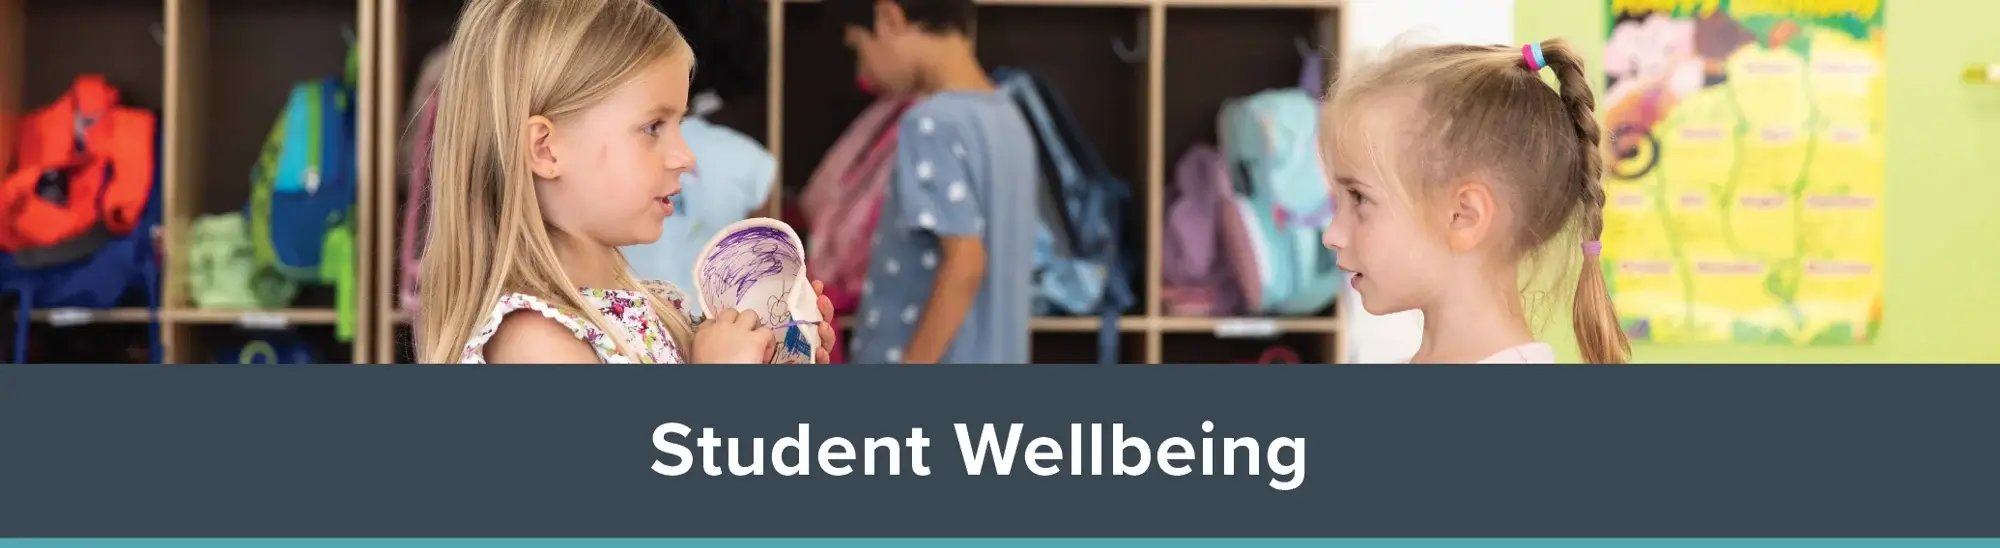 StudentWellbeing_banner_lowres